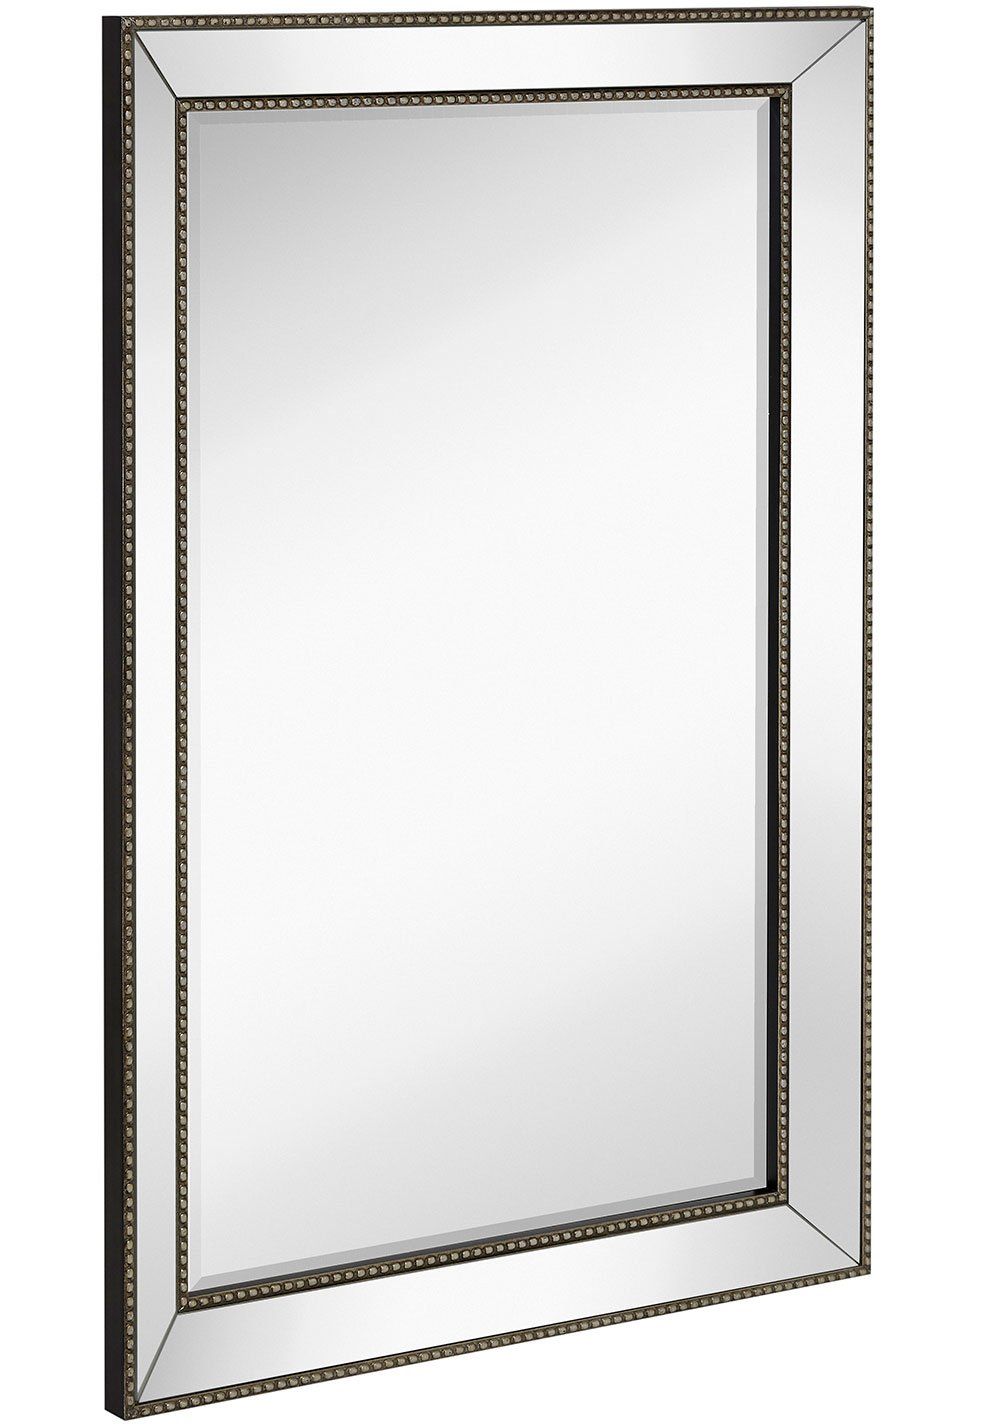 Large Framed Wall Mirror With Angled Beveled Mirror Frame And Beaded Throughout Bevel Edge Rectangular Wall Mirrors (View 13 of 15)